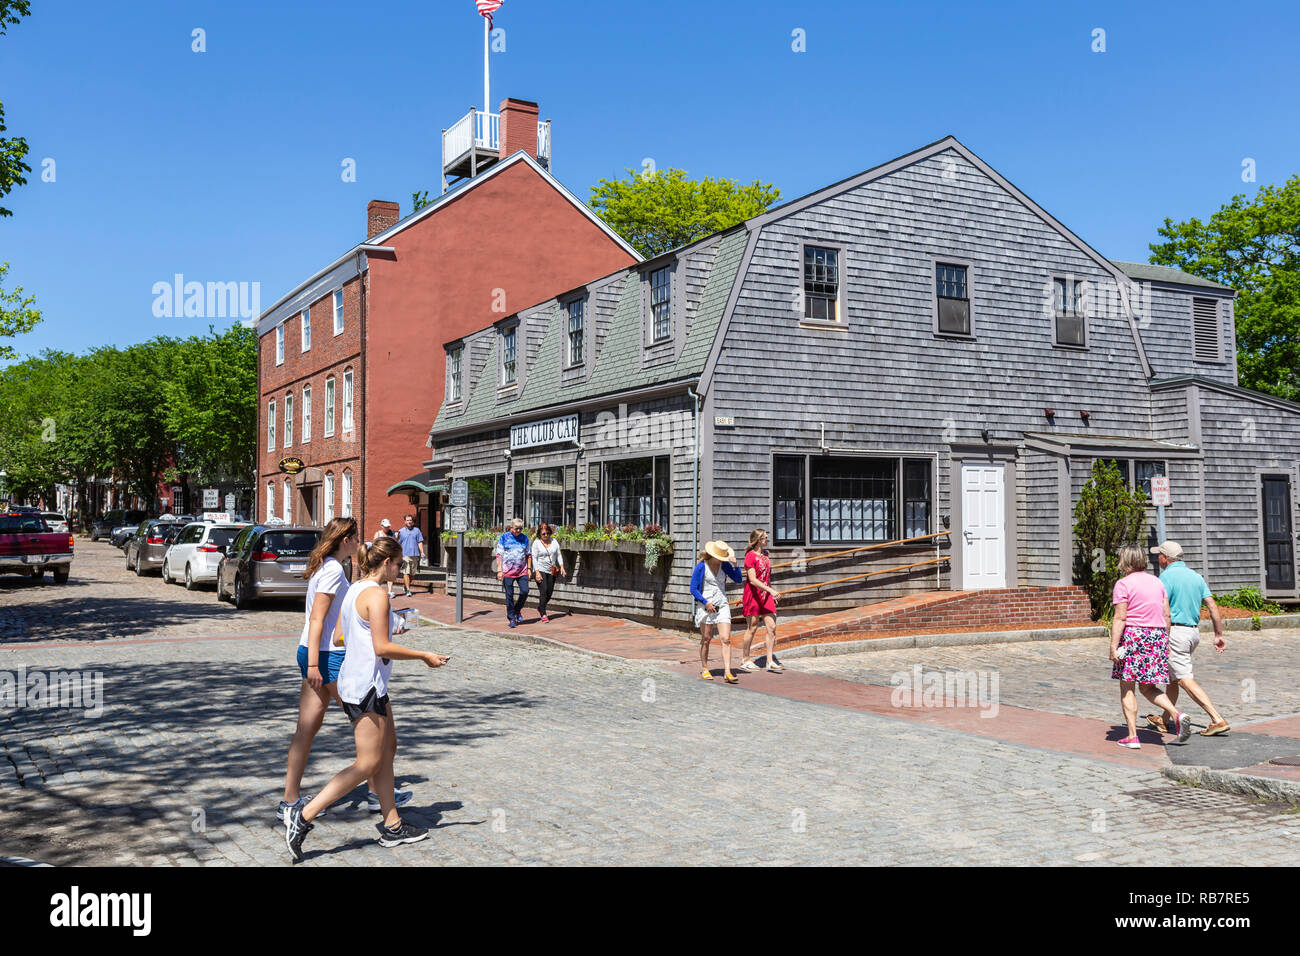 A view of Main Street including The Club Car restaurant in Nantucket, Massachusetts. Stock Photo